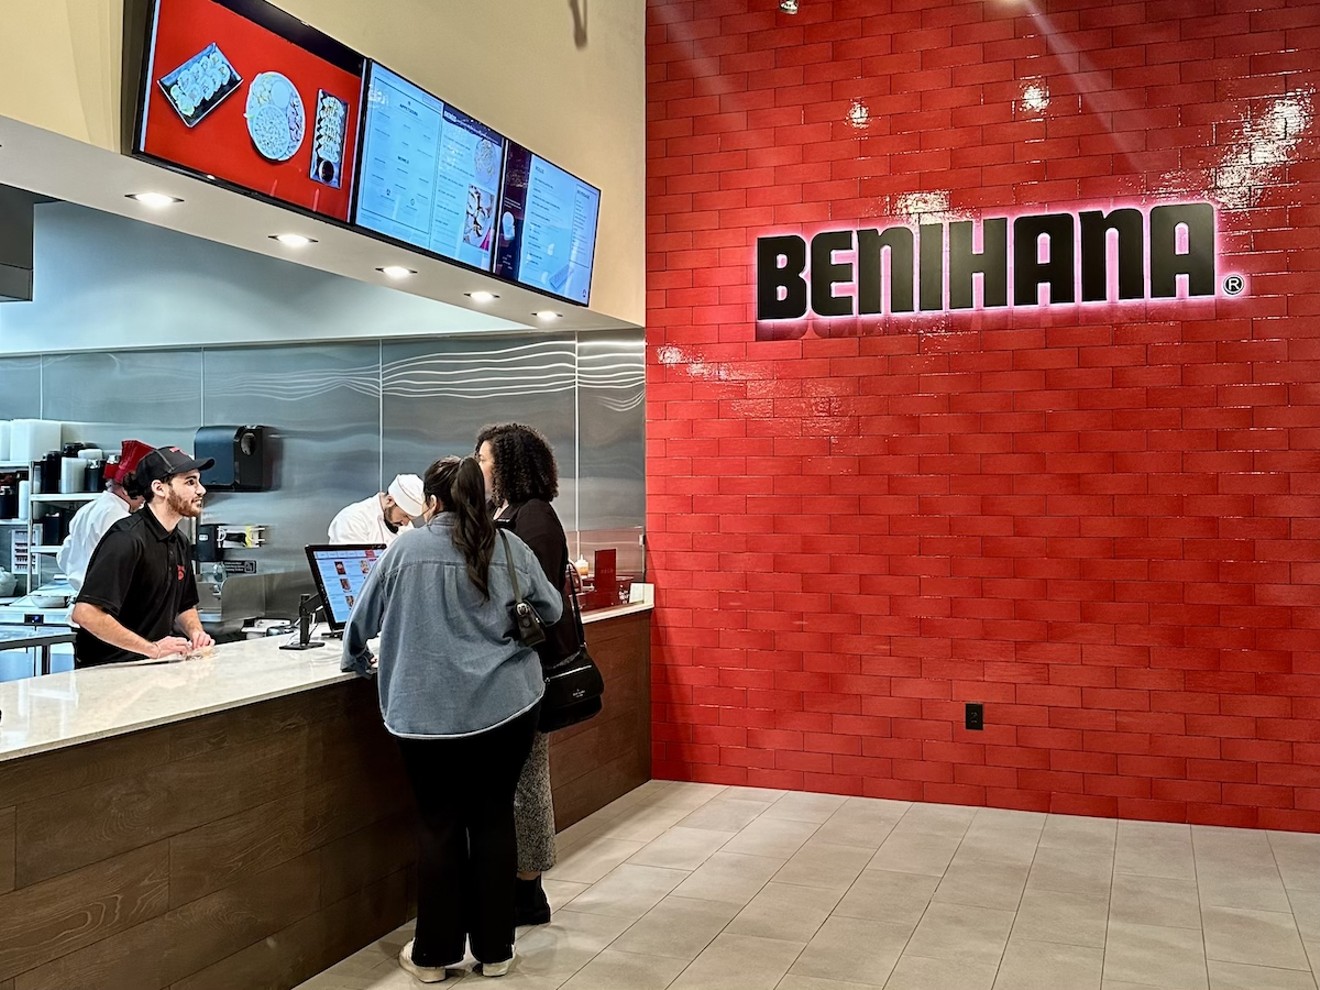 The walk-up experience at Benihana RA Sushi in Brickell makes Benihana a casual experience for the very first time.